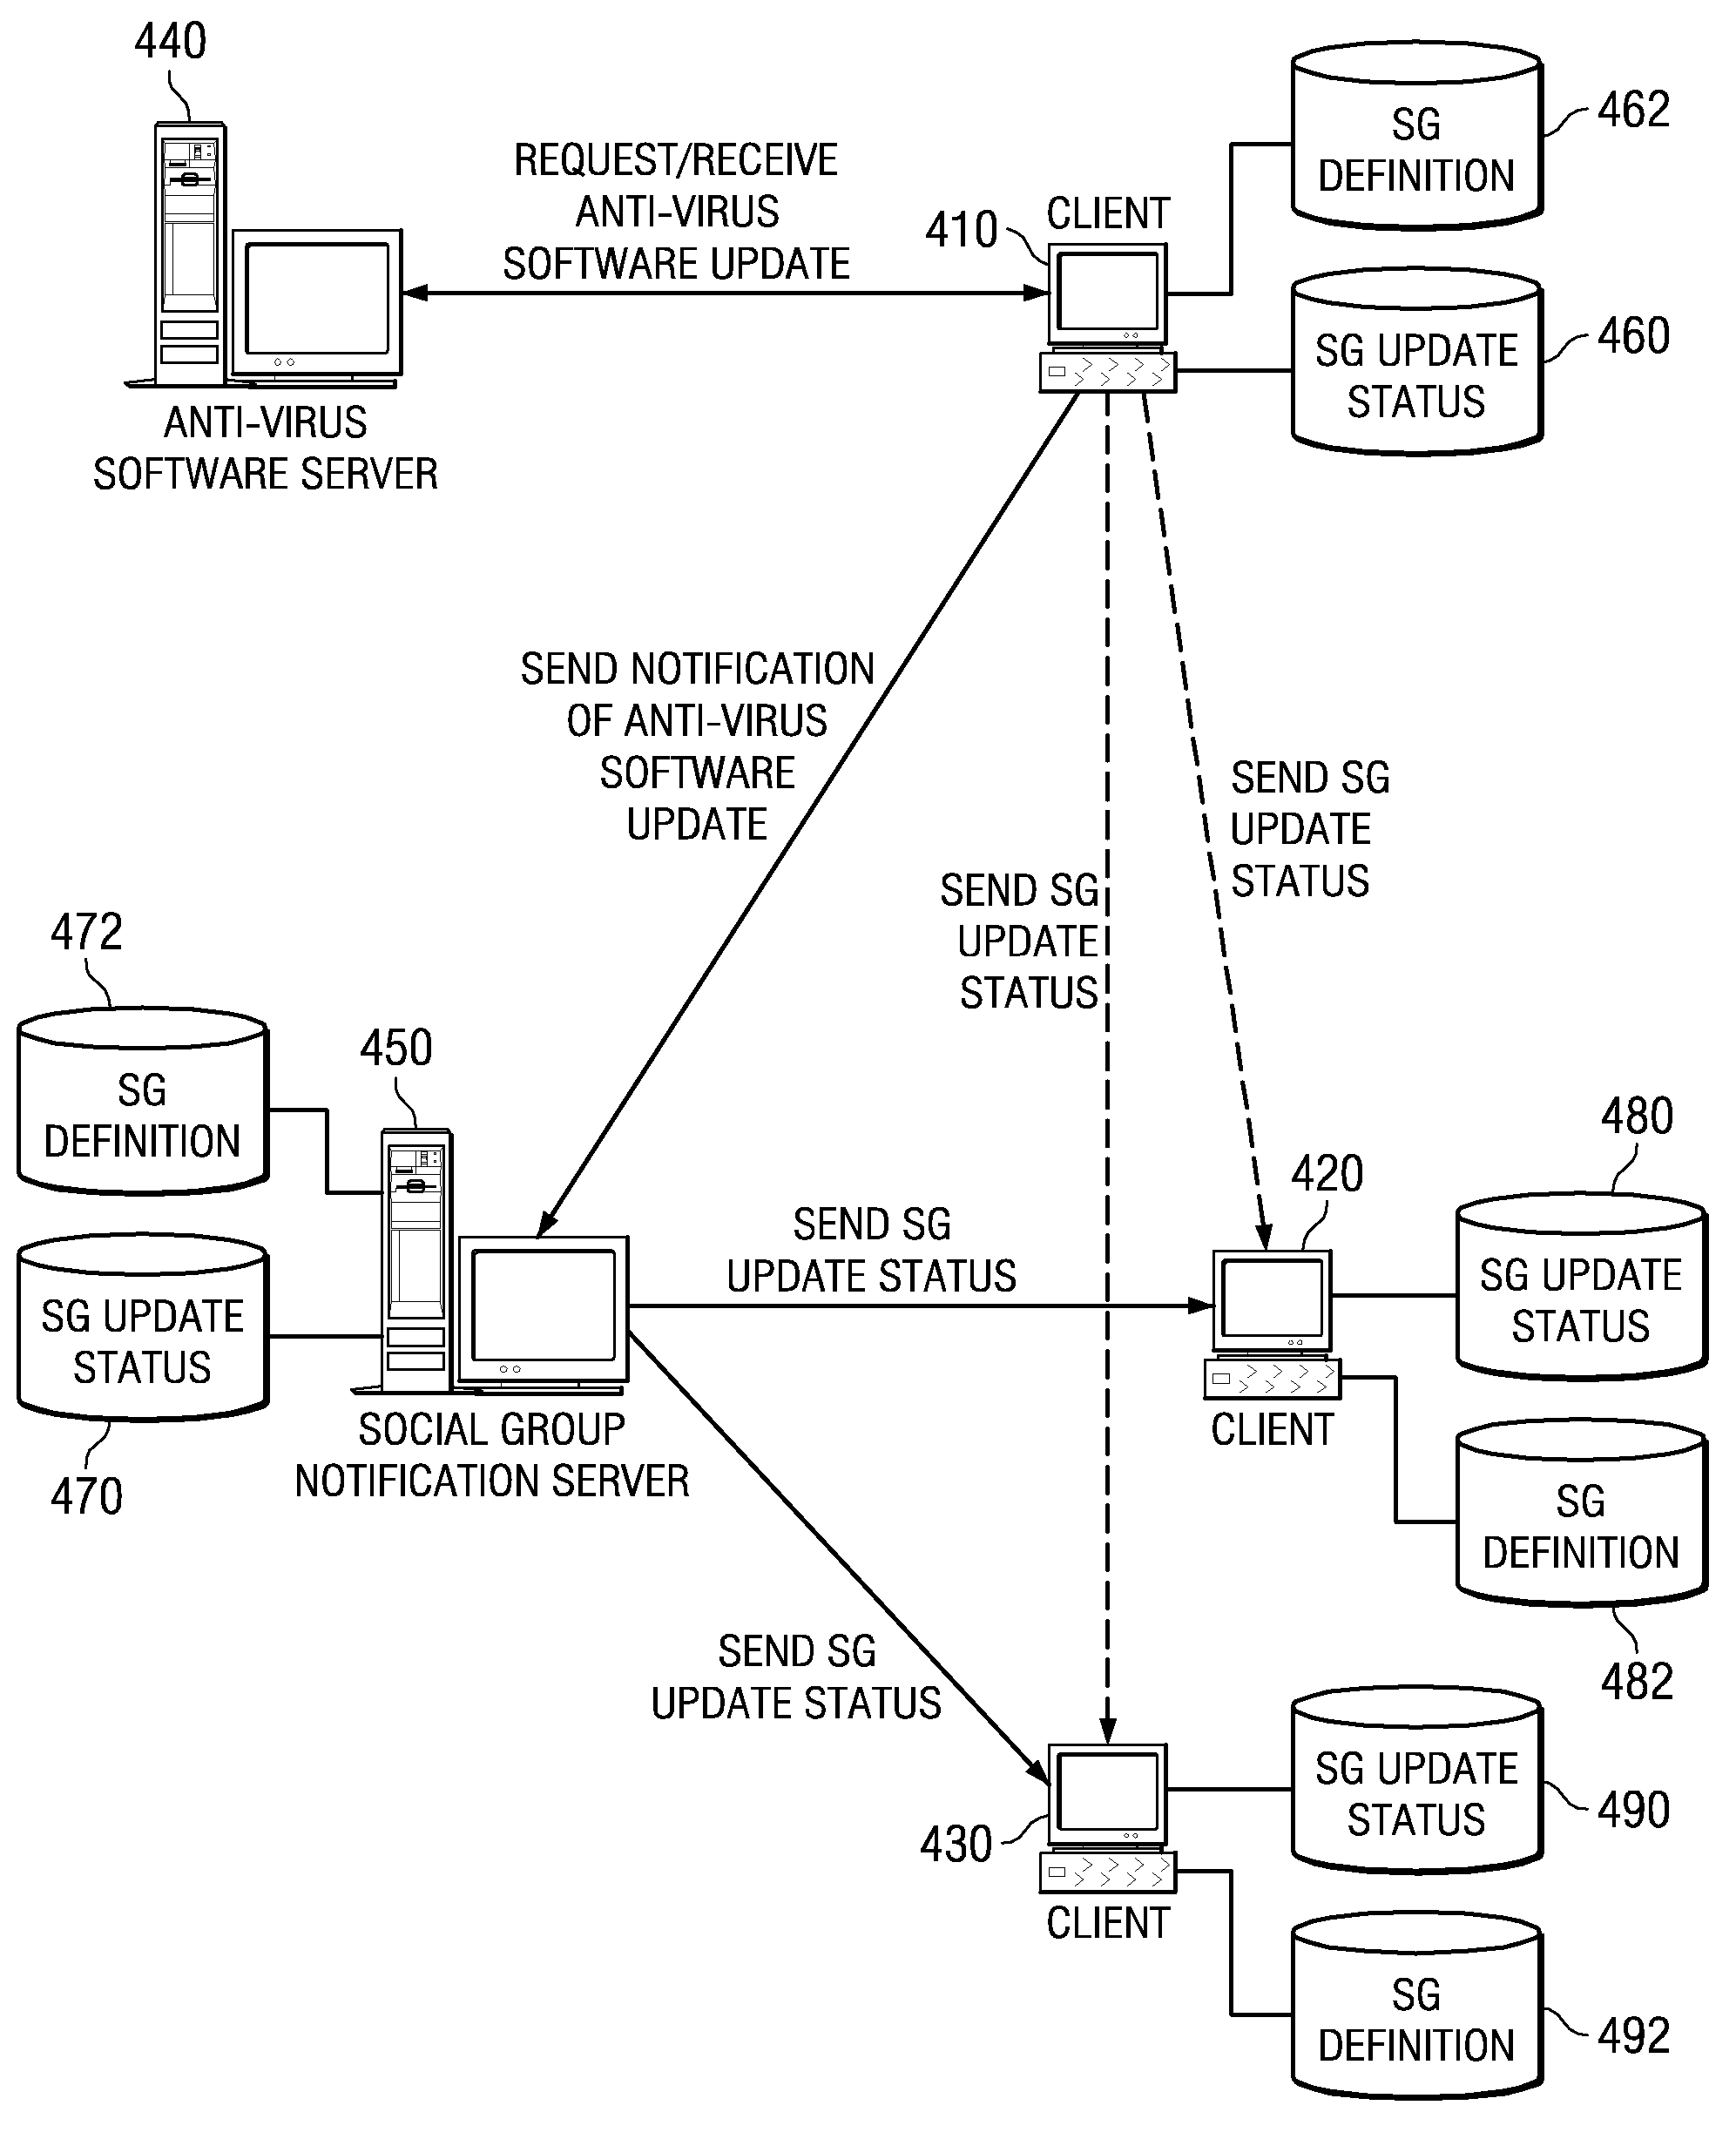 System and Method for Virus Notification Based on Social Groups